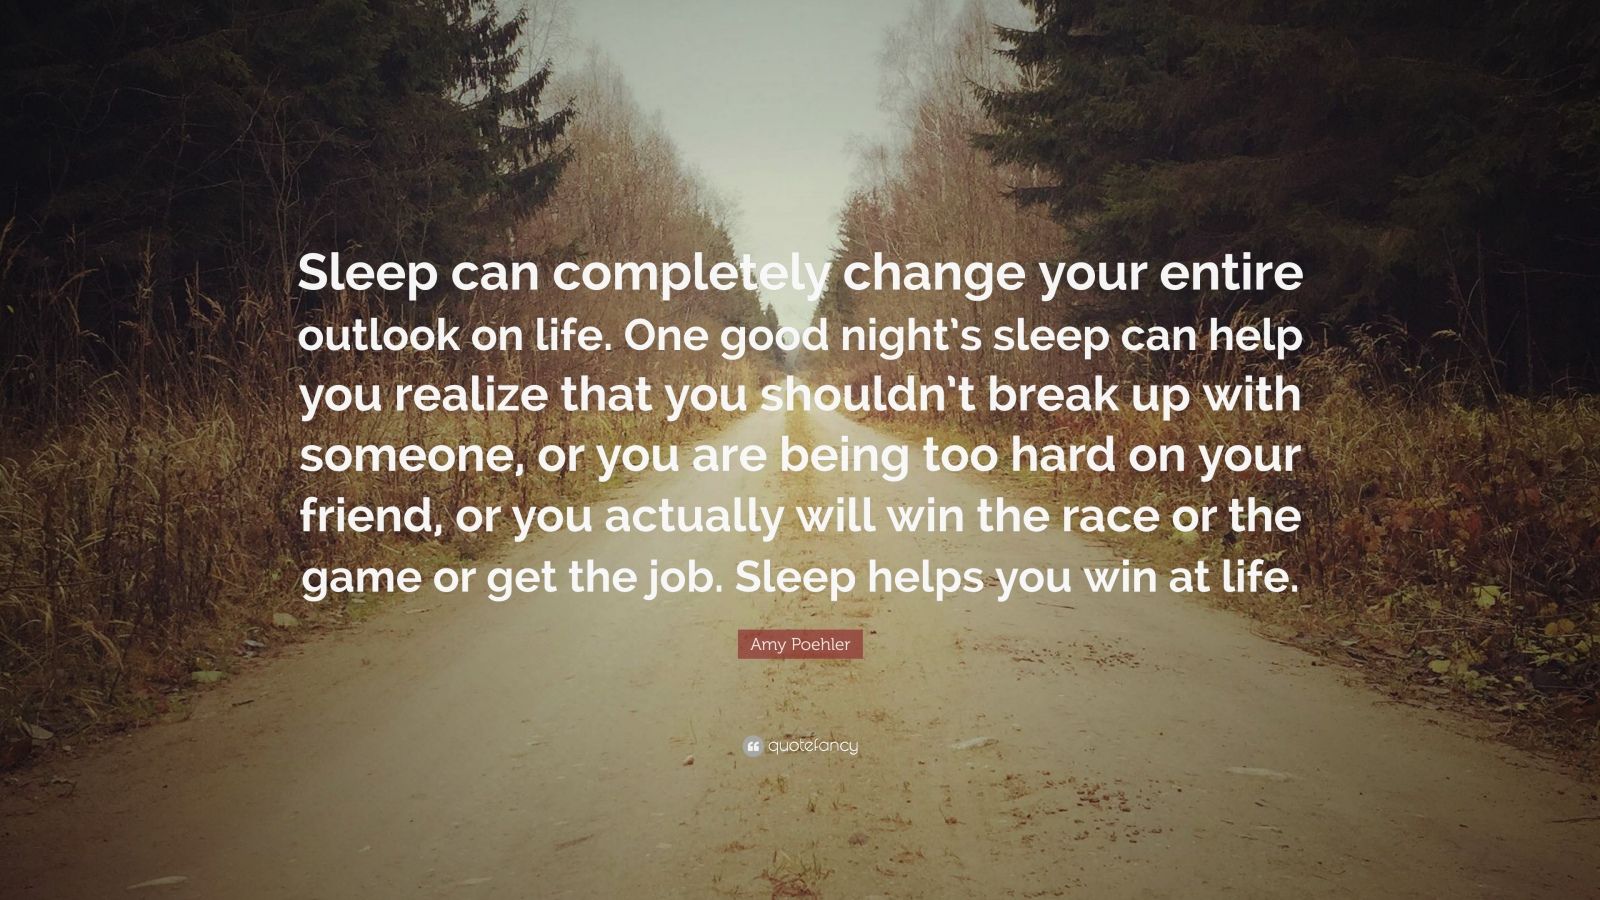 Amy Poehler Quote “Sleep can pletely change your entire outlook on life e